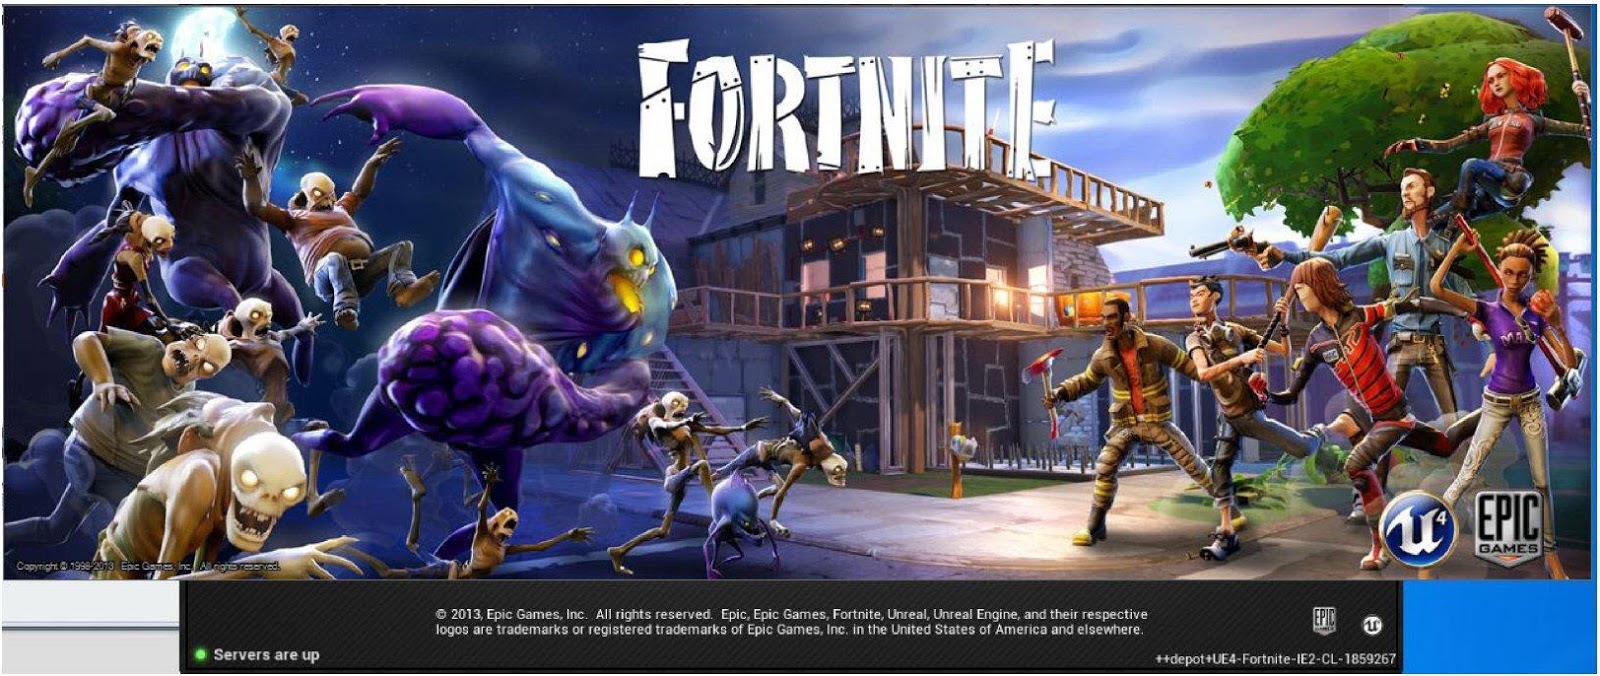 epic games files applications to register every location in fortnite as a trademark - fortnite epic games